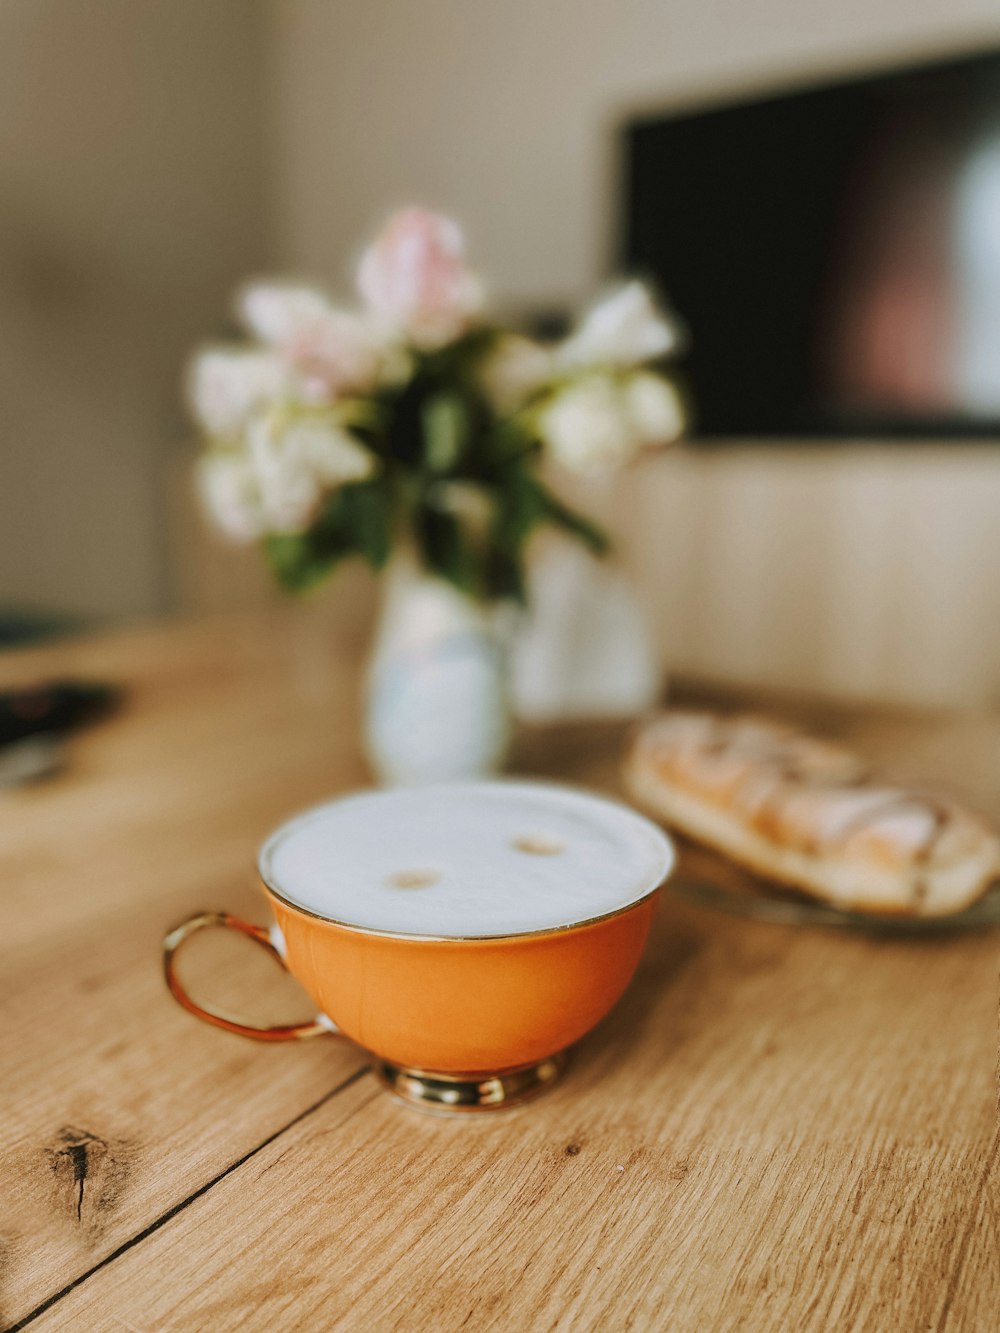 a cup and saucer sitting on a wooden table